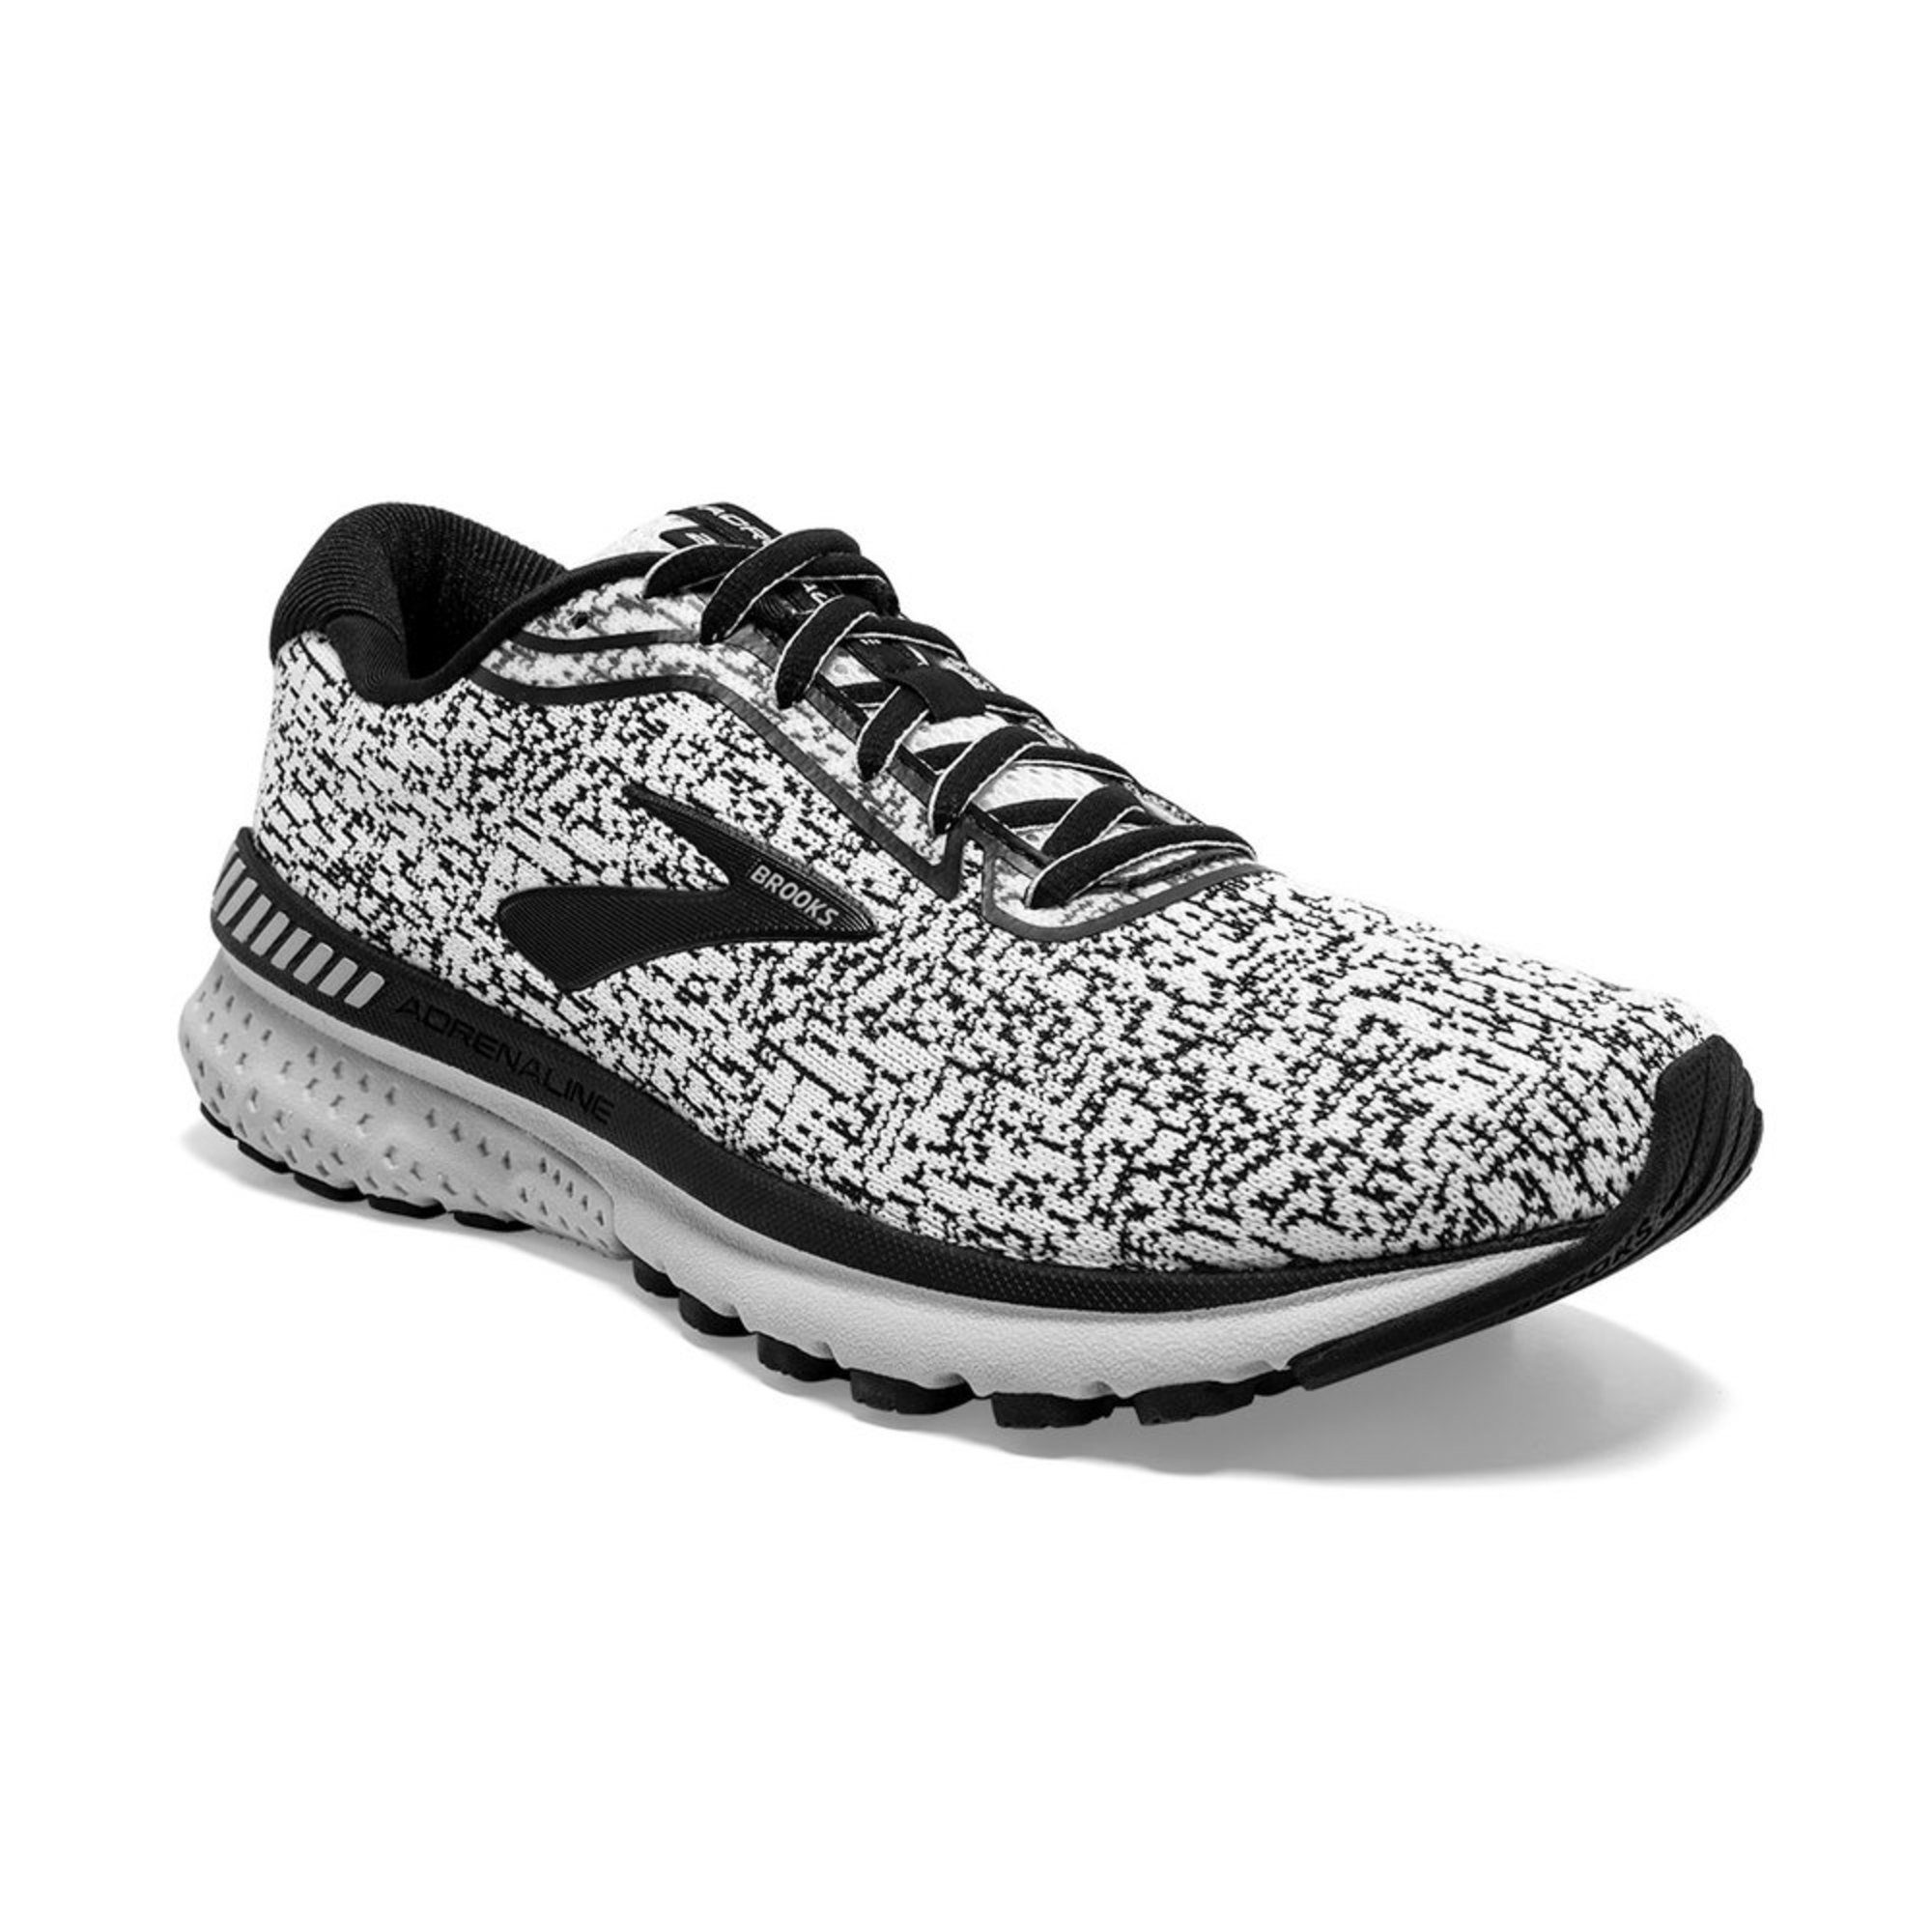 brooks fitness shoes